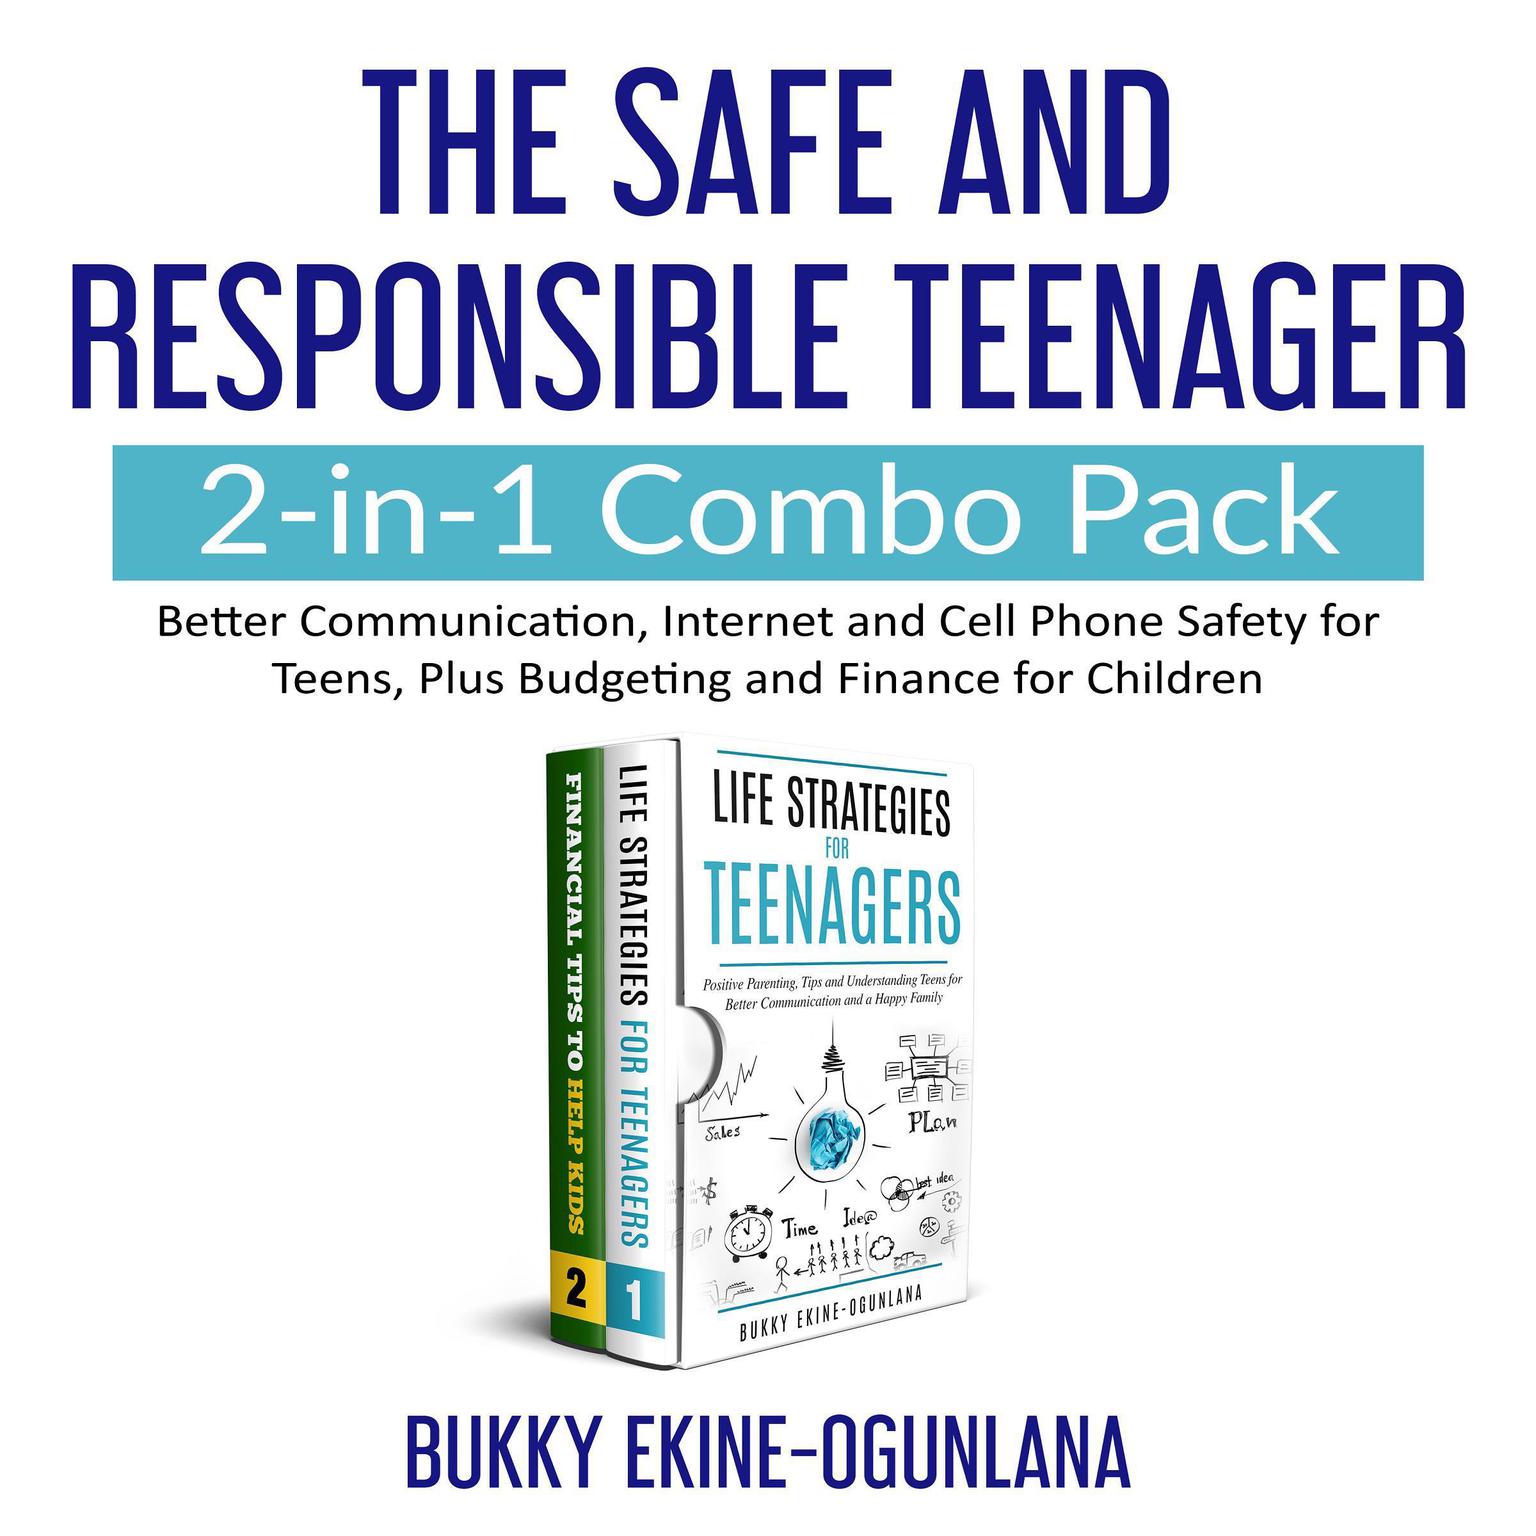 The Safe and Responsible Teenager 2-in-1 Combo Pack (Abridged): Better Communication, Internet and Cell Phone Safety for Teens, Plus Budgeting and Finance for Children Print on Demand  Audiobook, by Bukky Ekine-Ogunlana